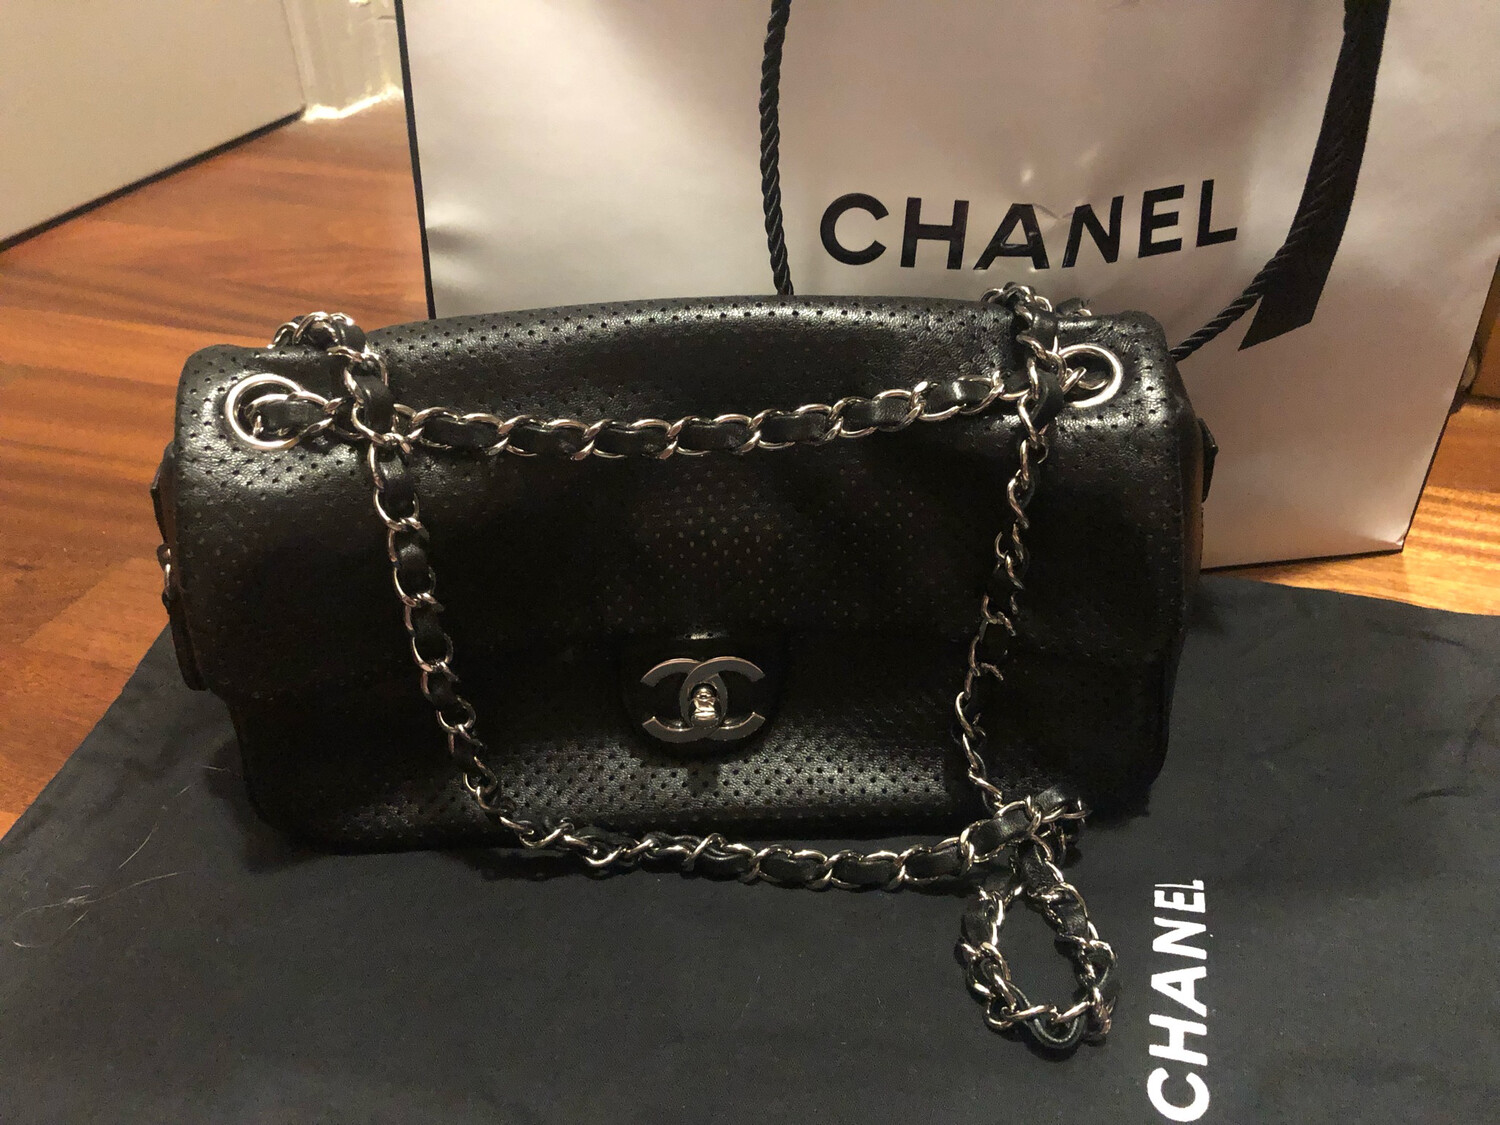 CHANEL PERFORATED CLASSIC FLAP BAG